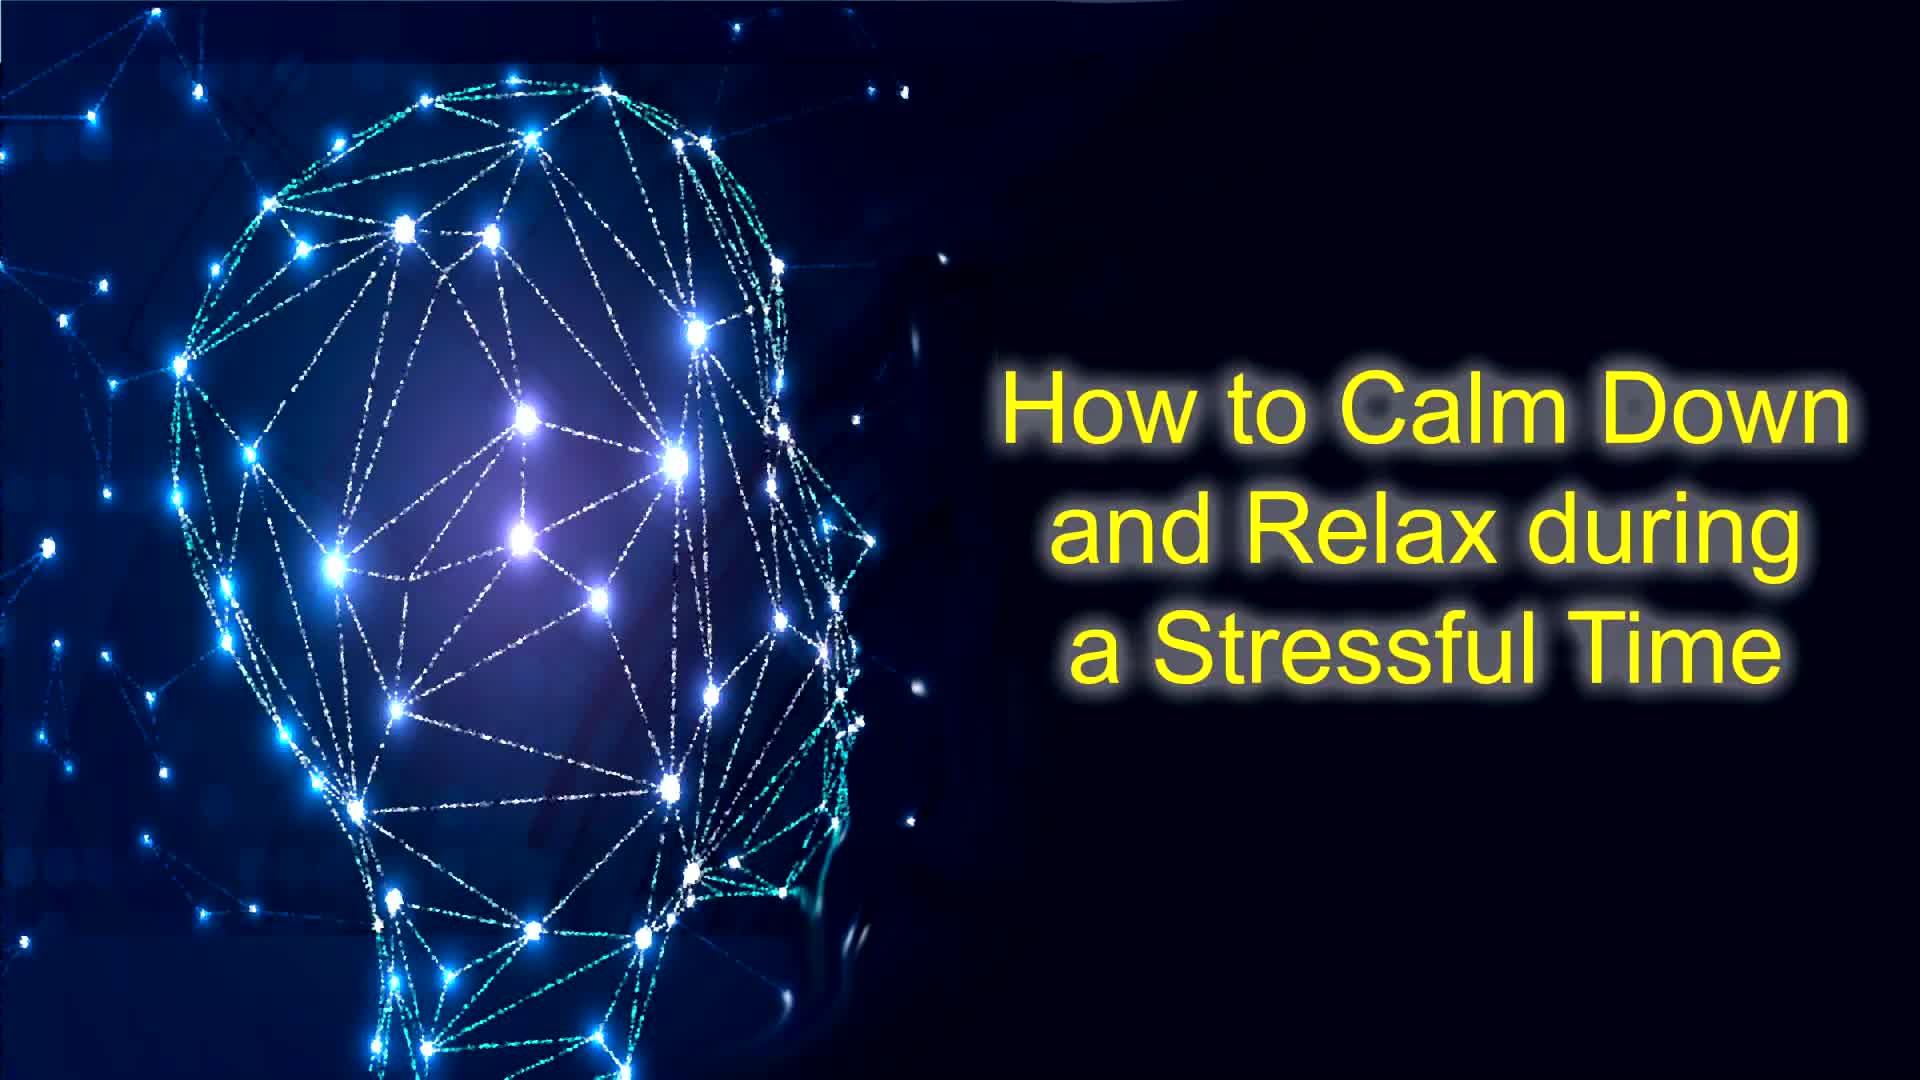 Video: How to Calm Down and Relax during a Stressful Time - 